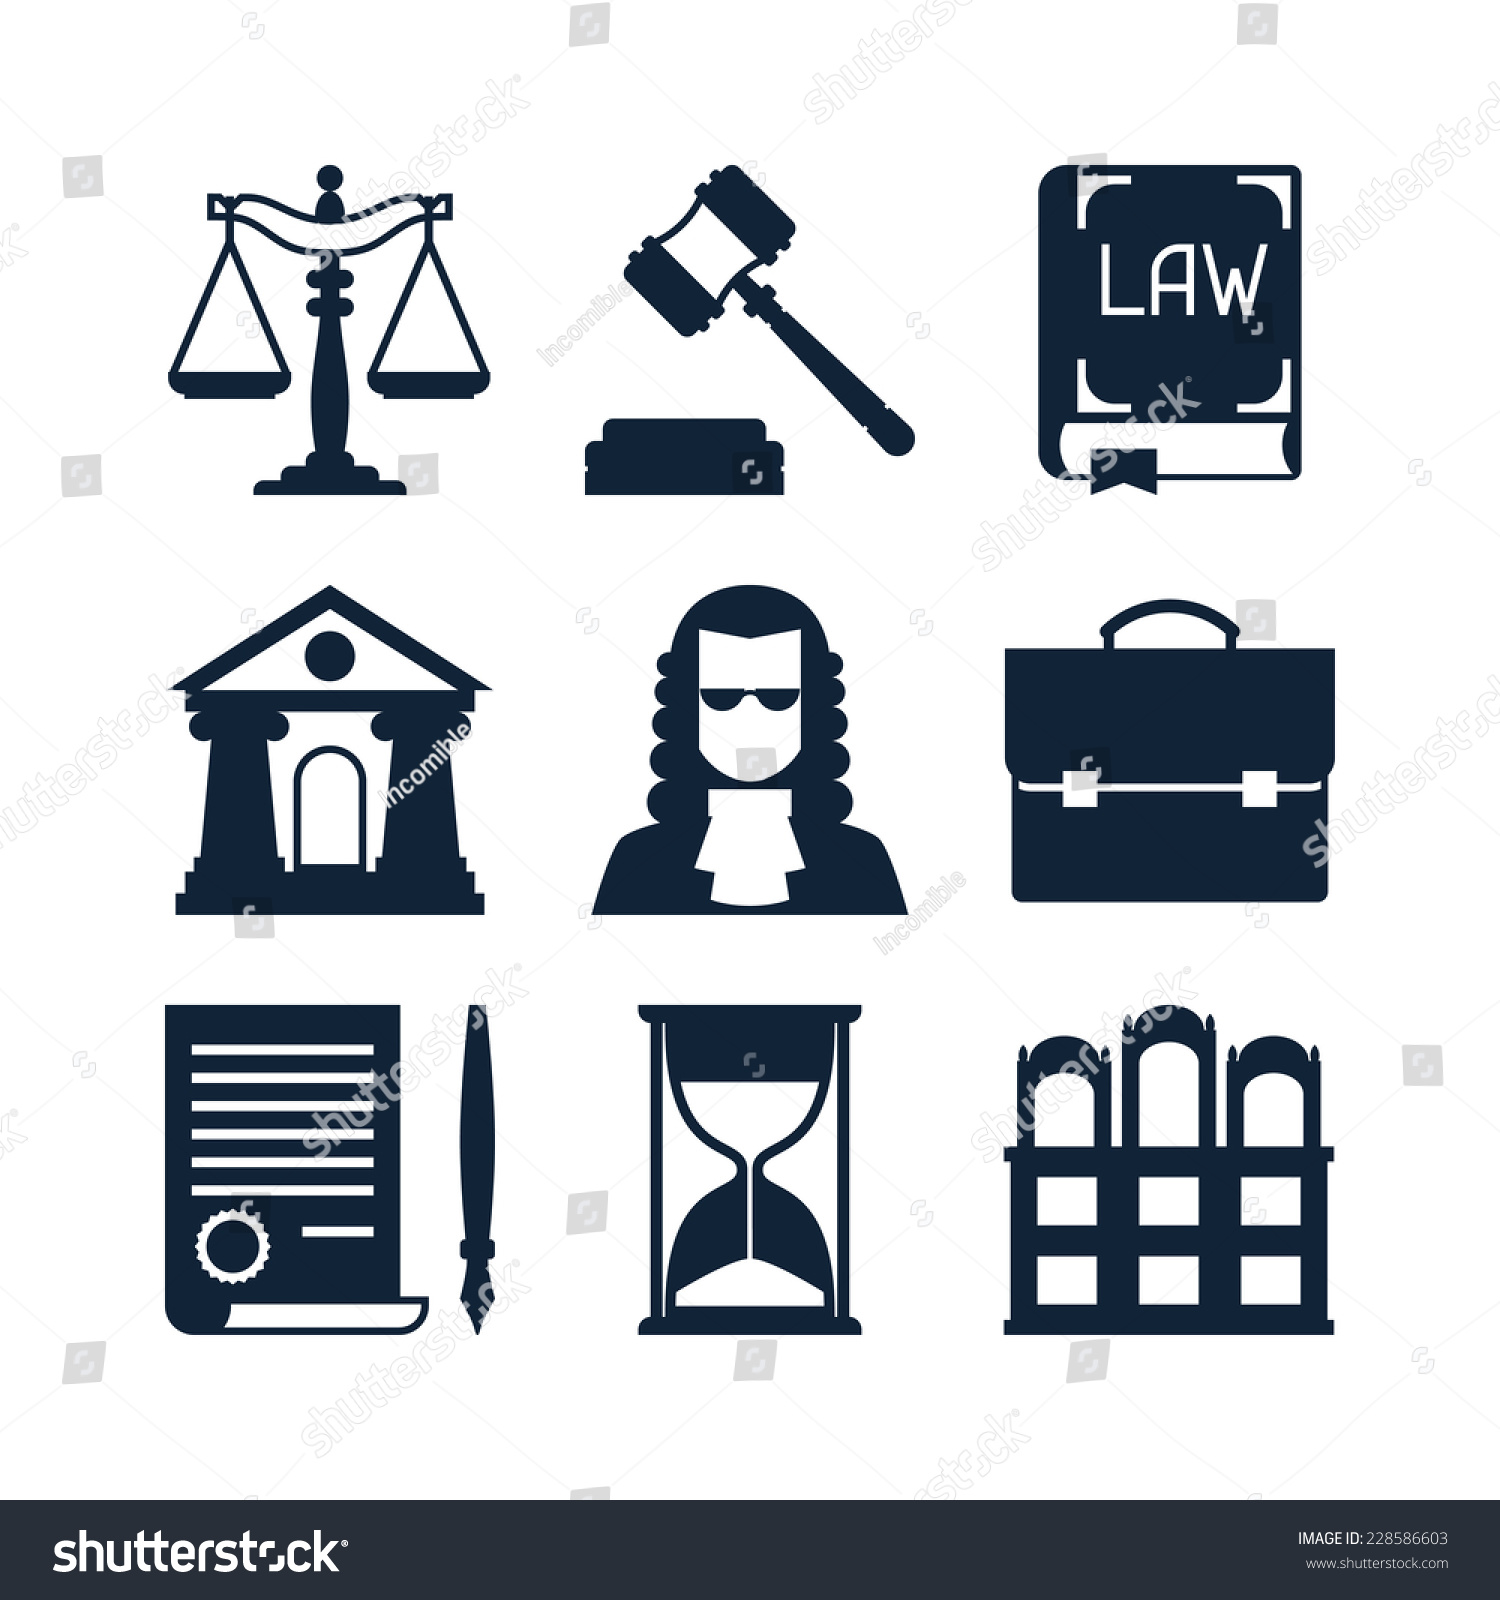 Law Icons Set In Flat Design Style. Stock Vector Illustration 228586603